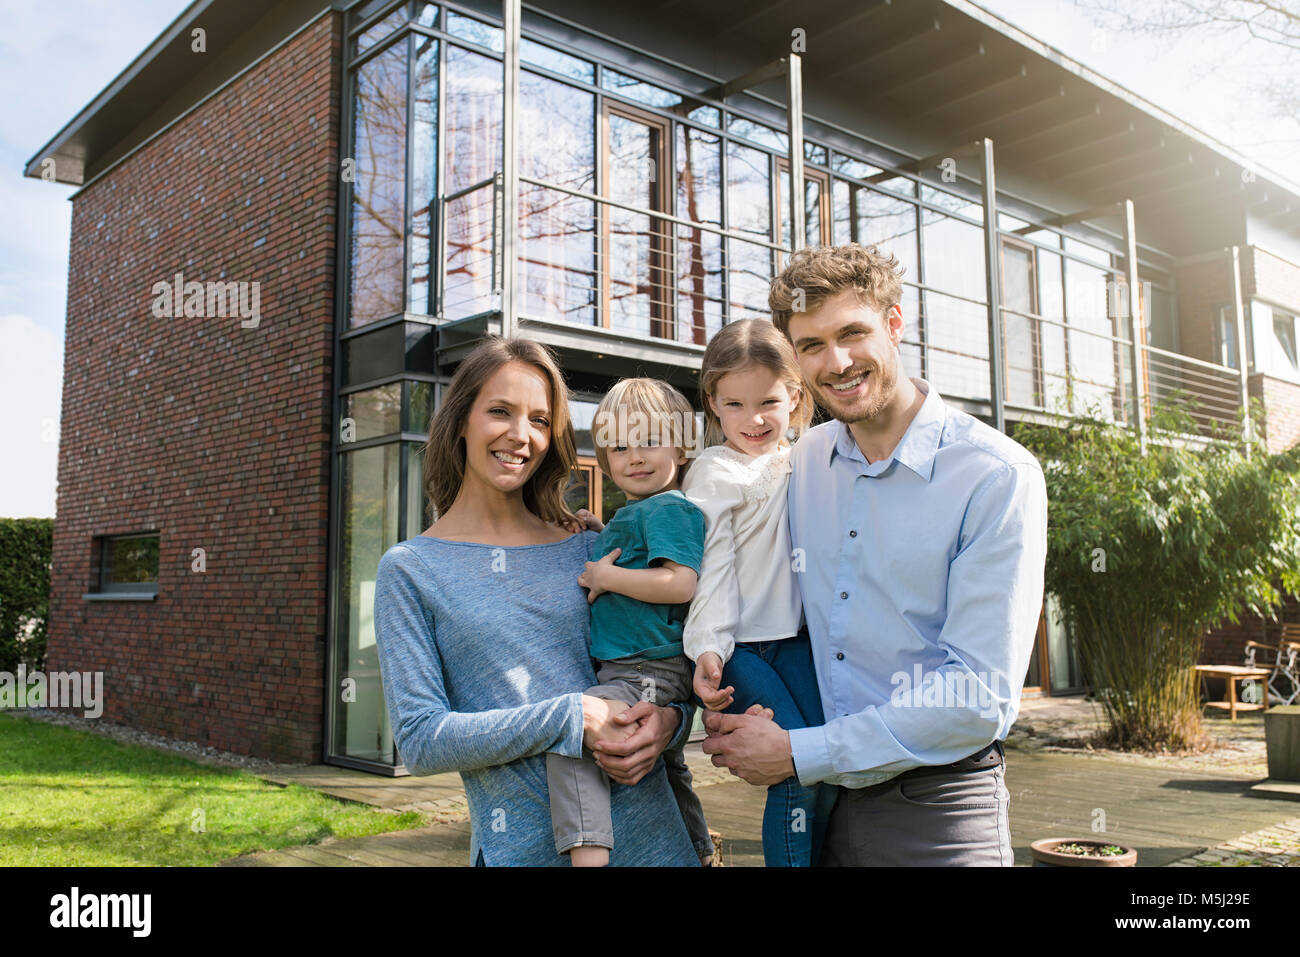 Portrait of smiling family in front of their home Stock Photo